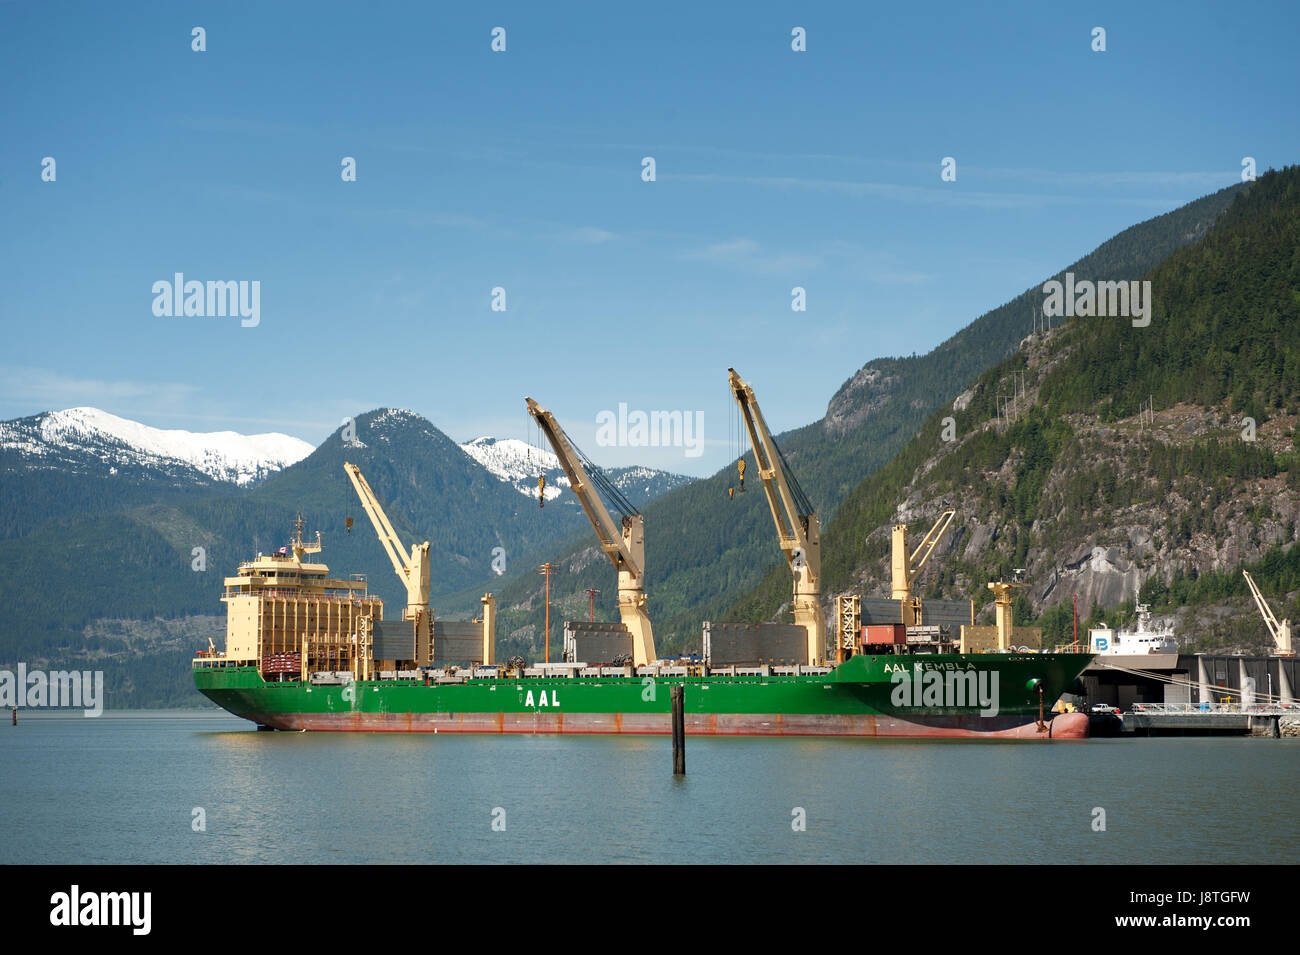 The cargo ship Aal Kembla loading up at the Squamish terminal freight dock.  Squamish BC, Canada. Stock Photo